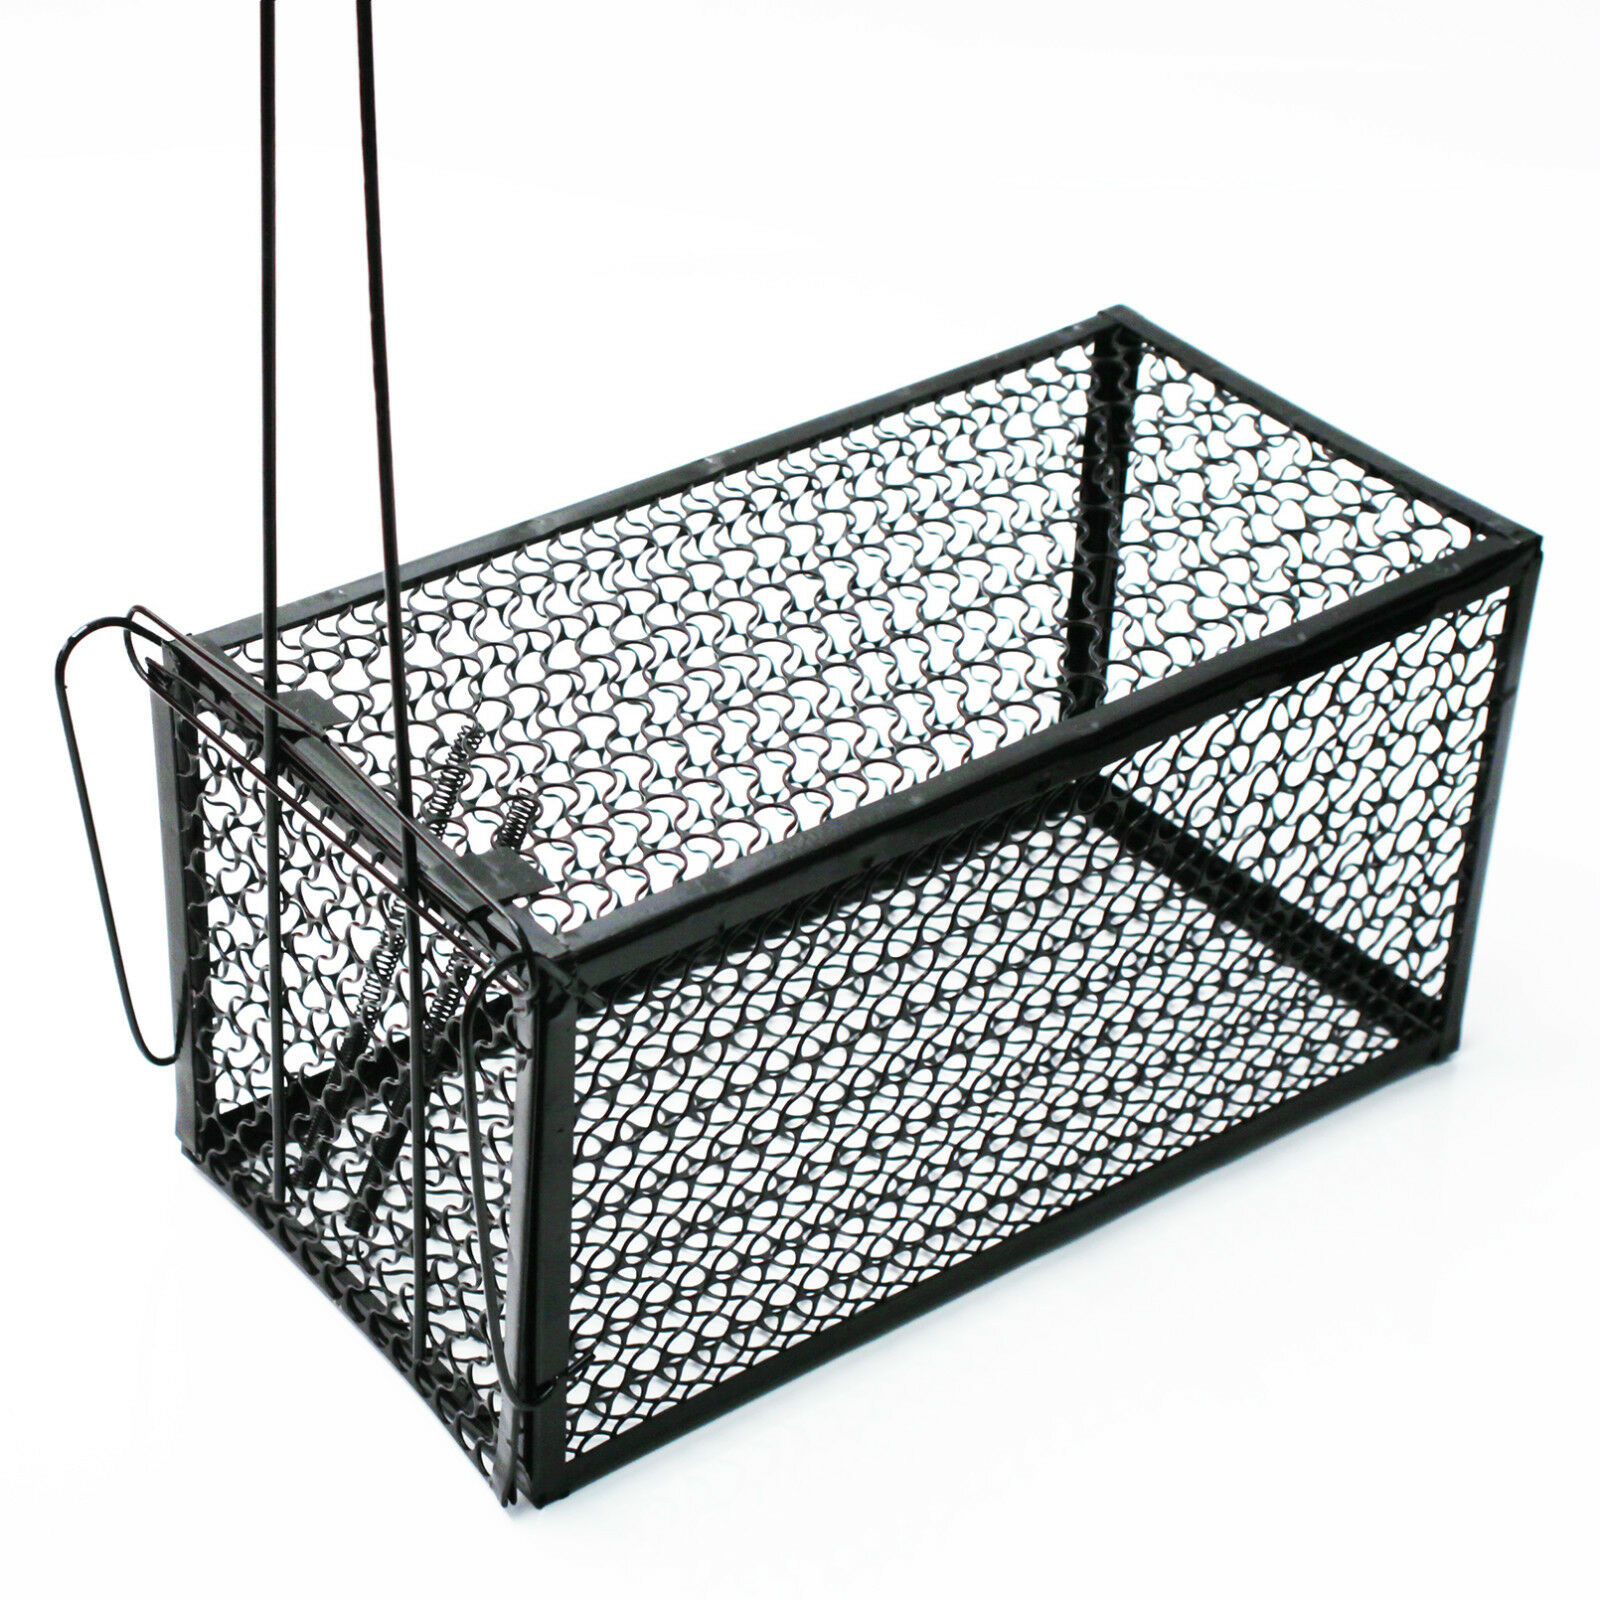 OEM/ODM China Outside Dog Cage - 24x12x12cm Small Animal Live Hunting TRAP Catch Alive Survival Mouse Bird Snare cage – JINSHI